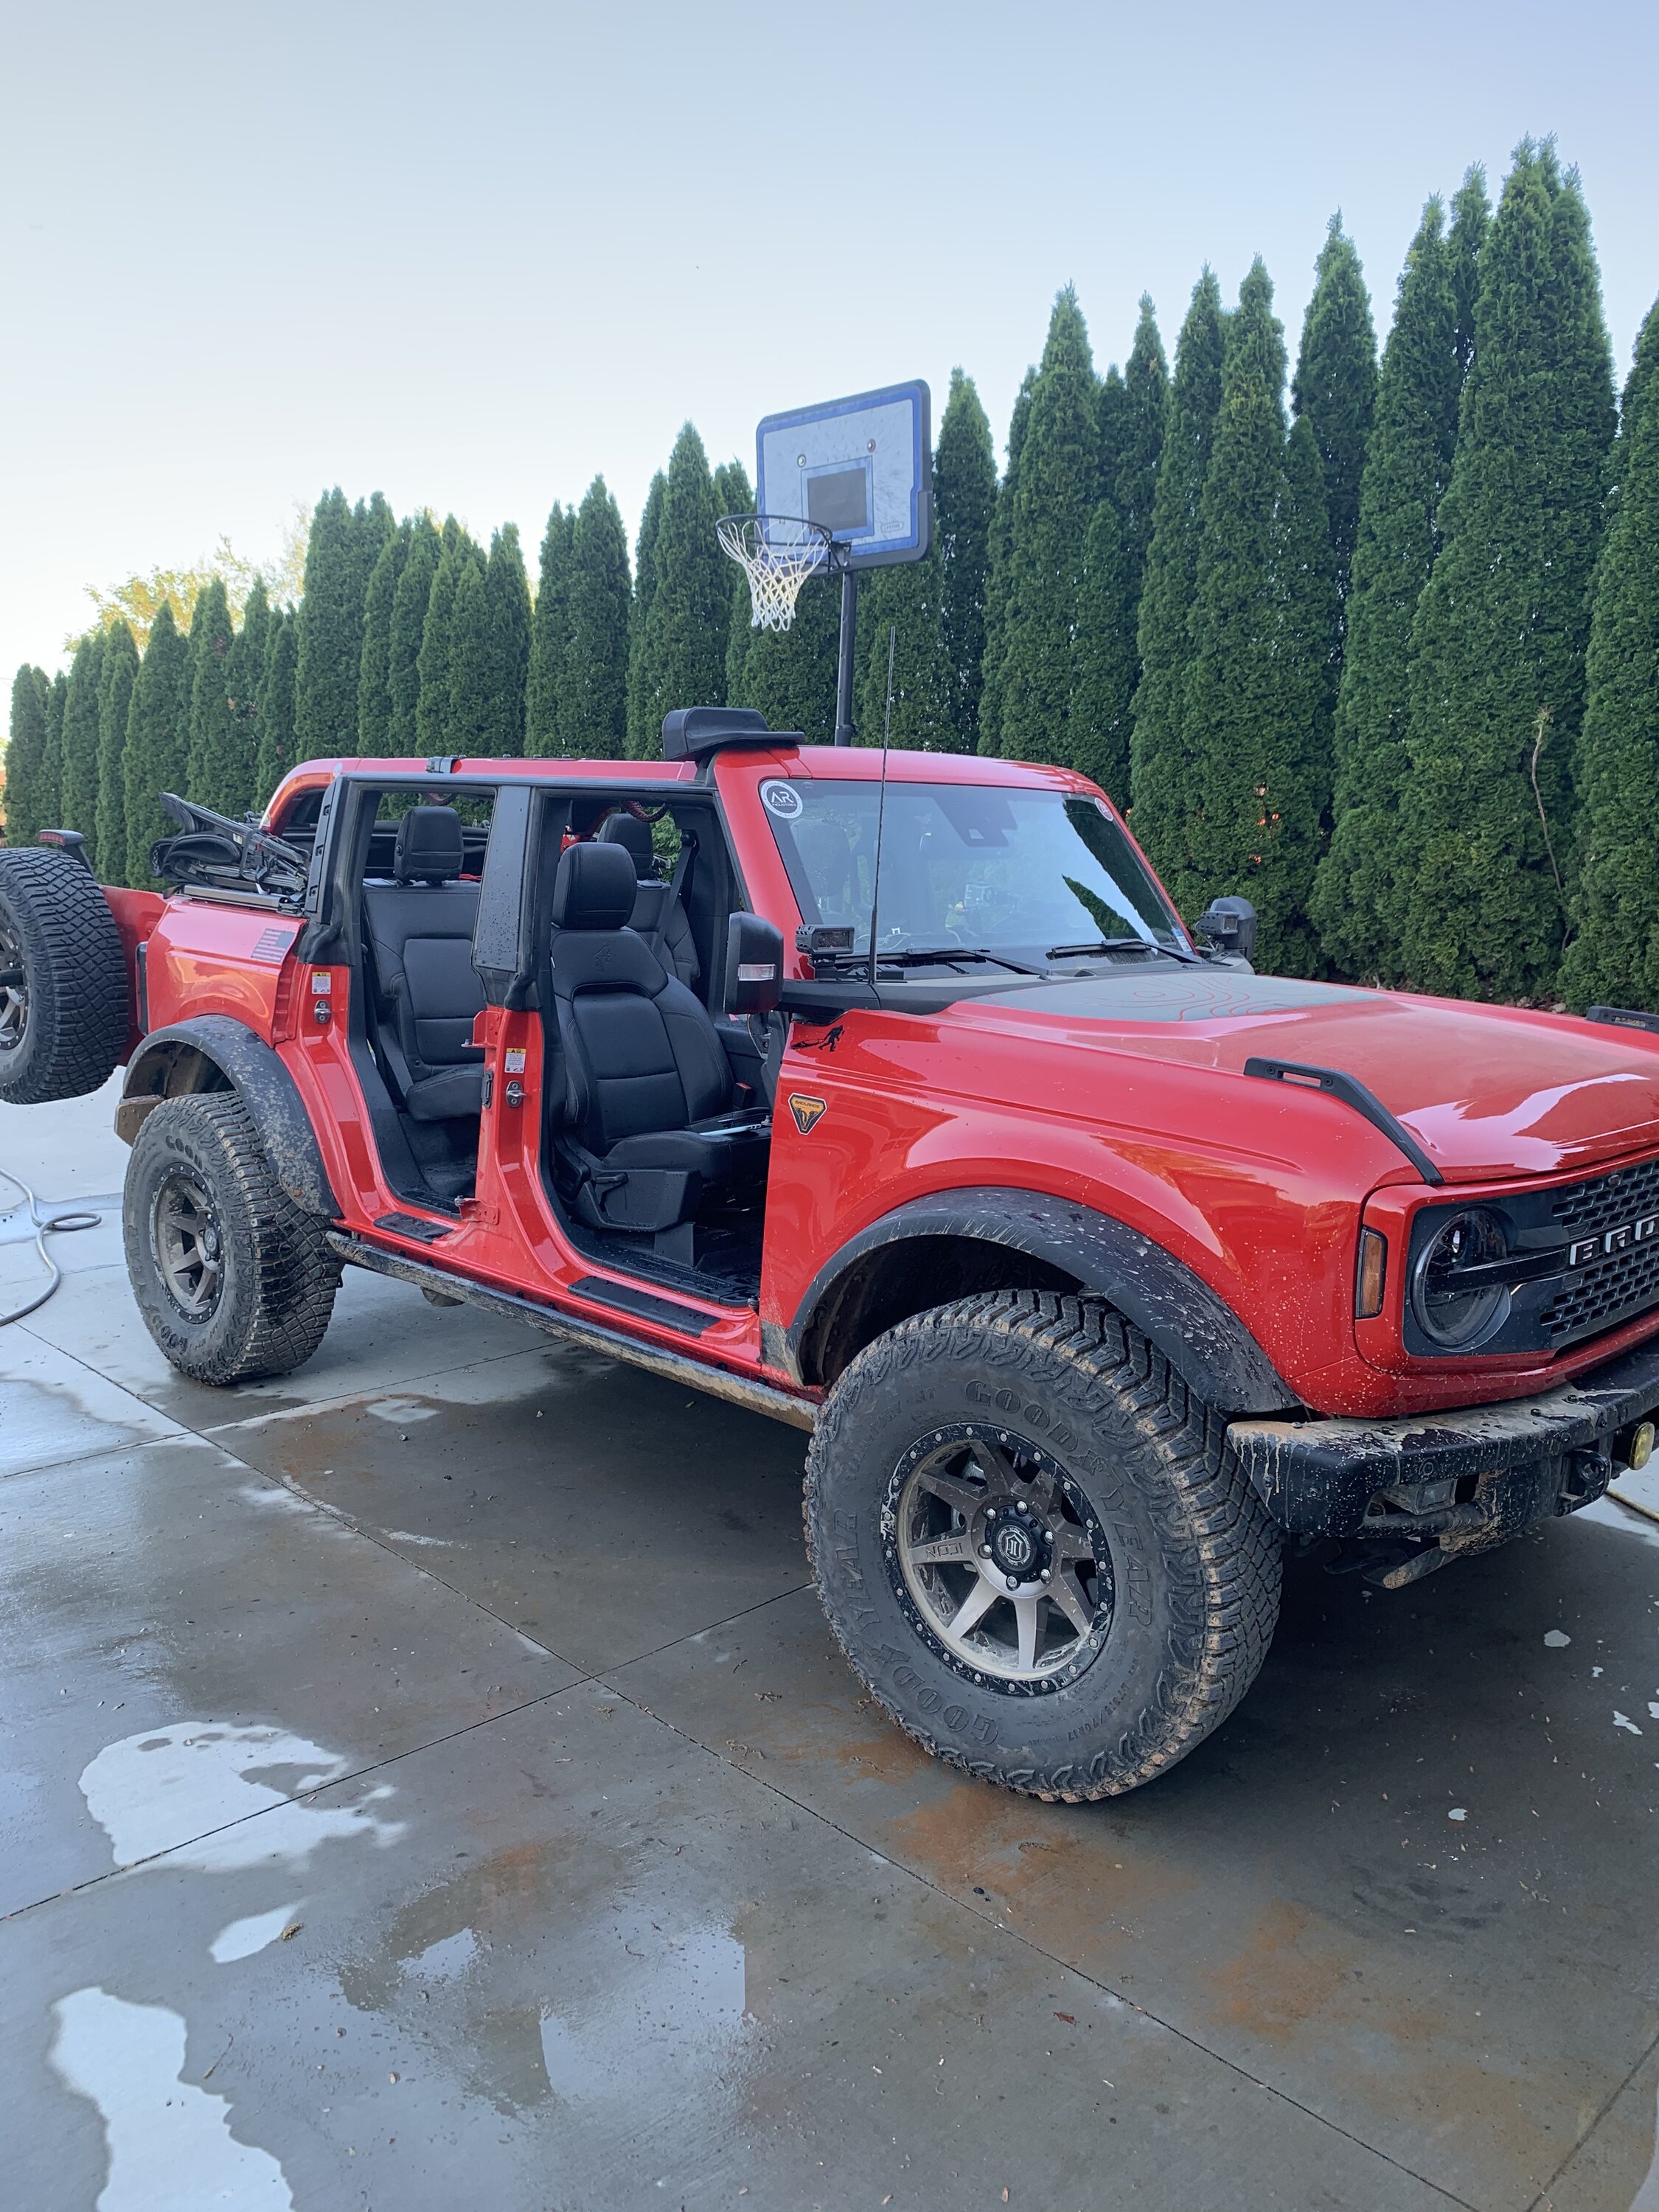 Ford Bronco Let’s see your doors off pics… D984D7EB-443F-4186-BBEB-0E9277C22809